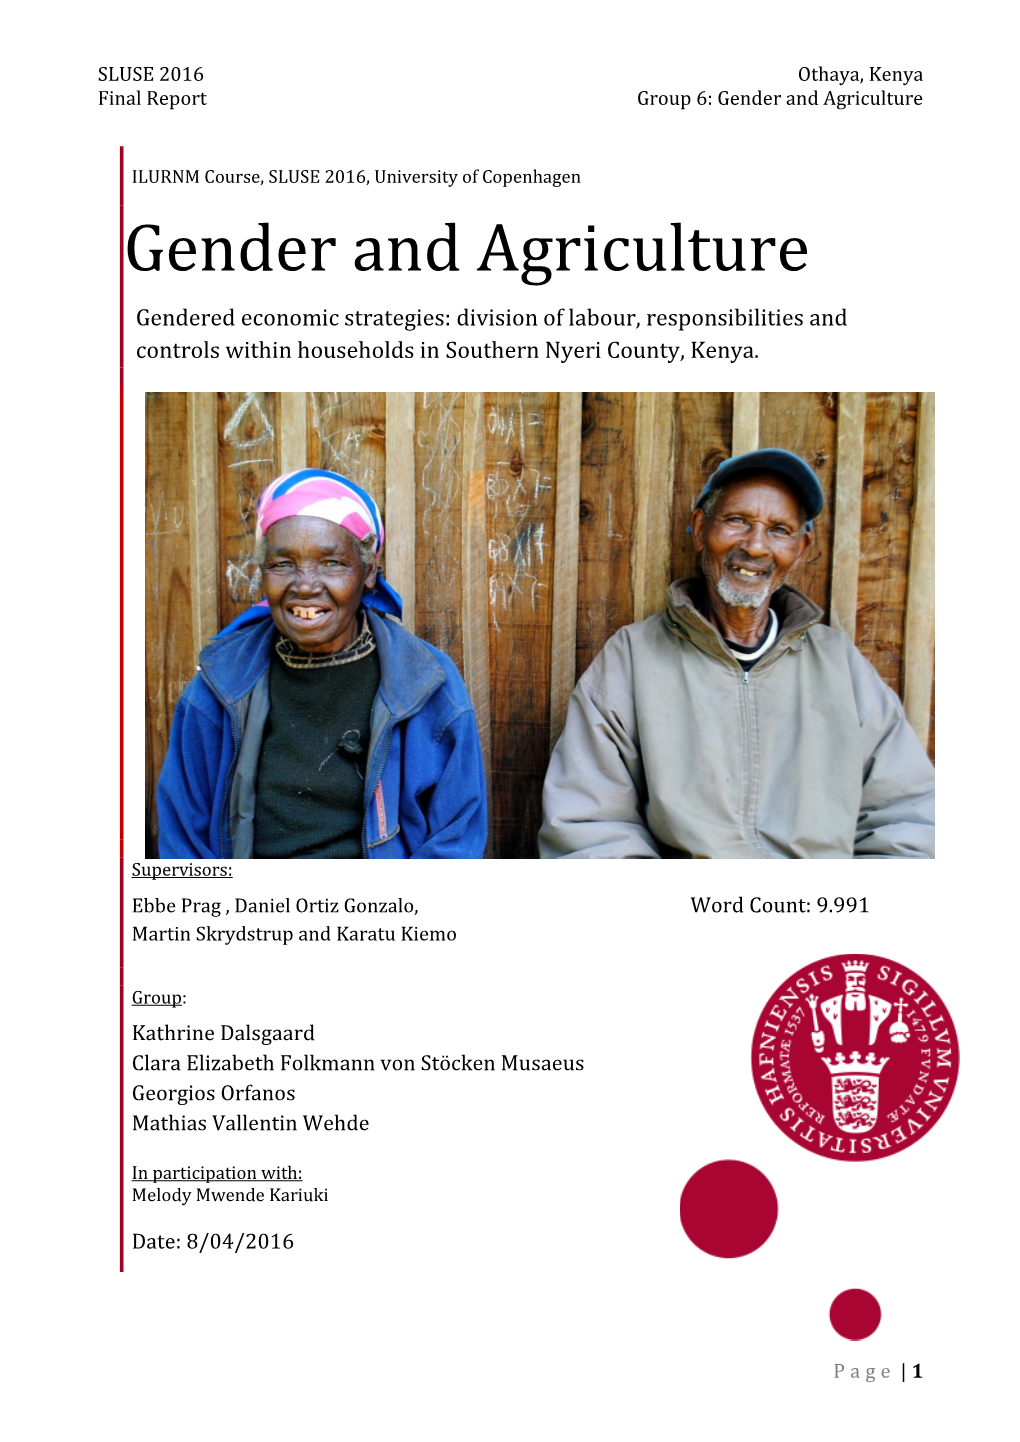 Gender and Agriculture